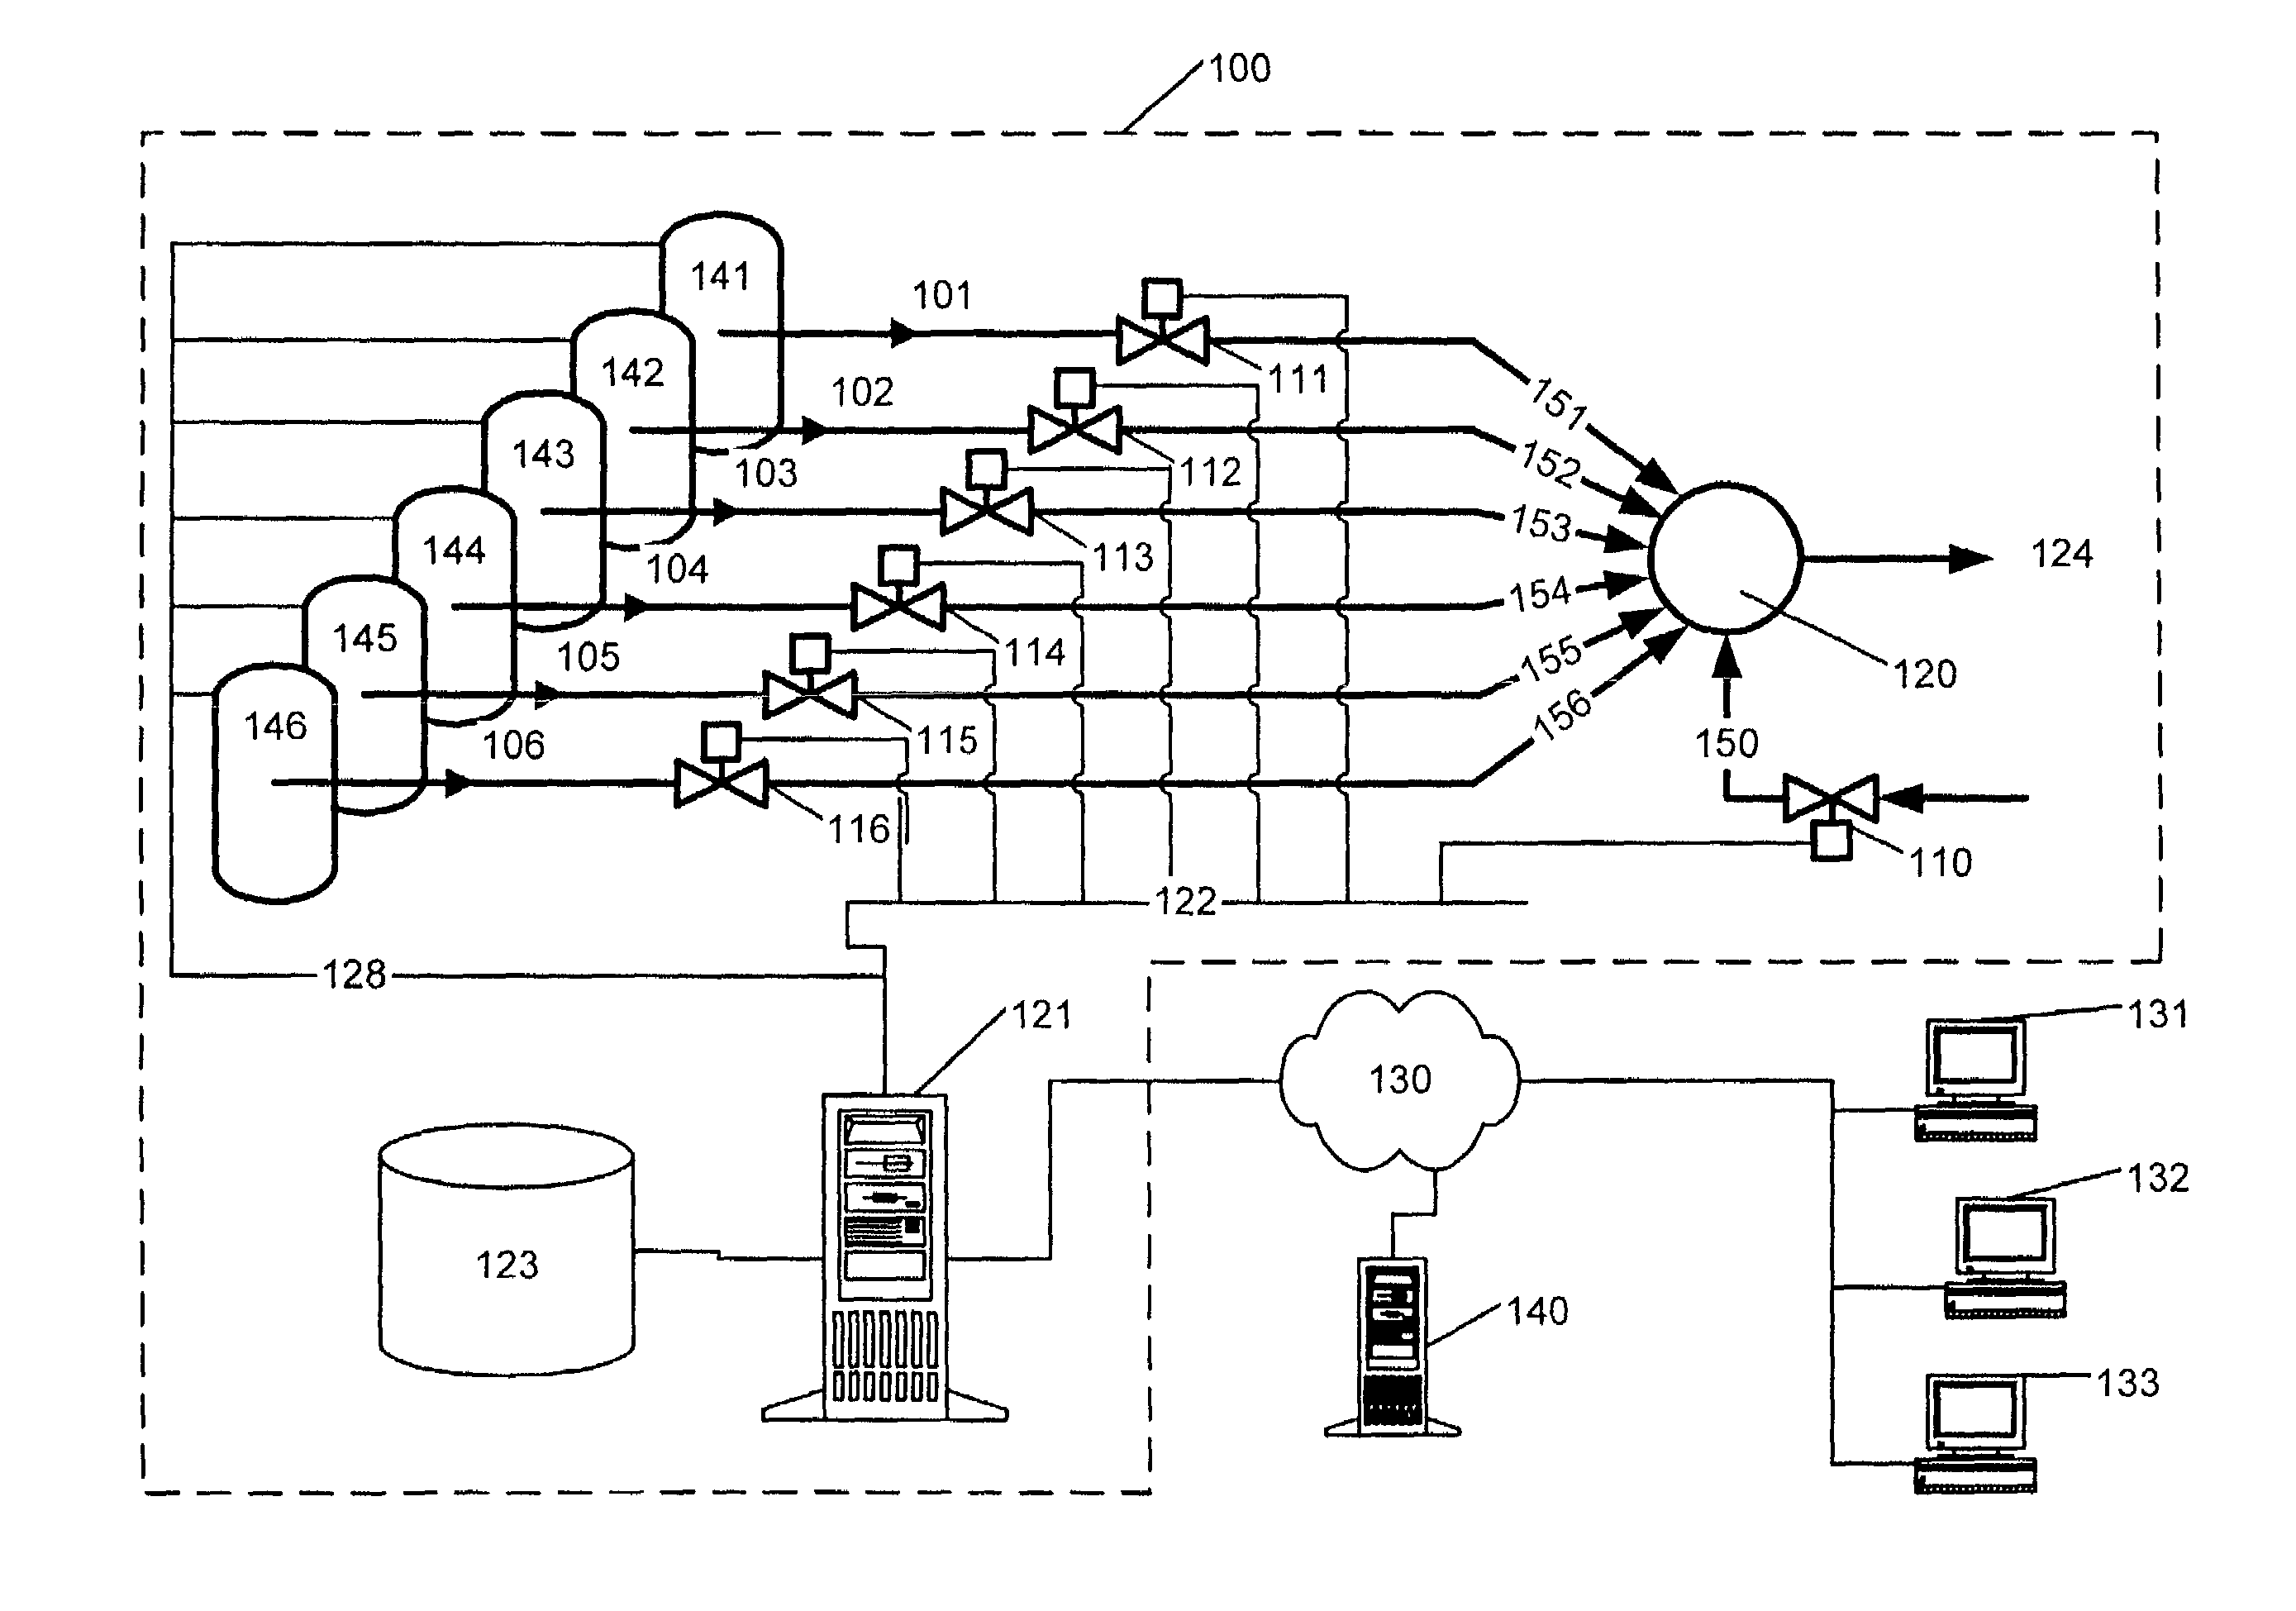 Distributed paint manufacturing system